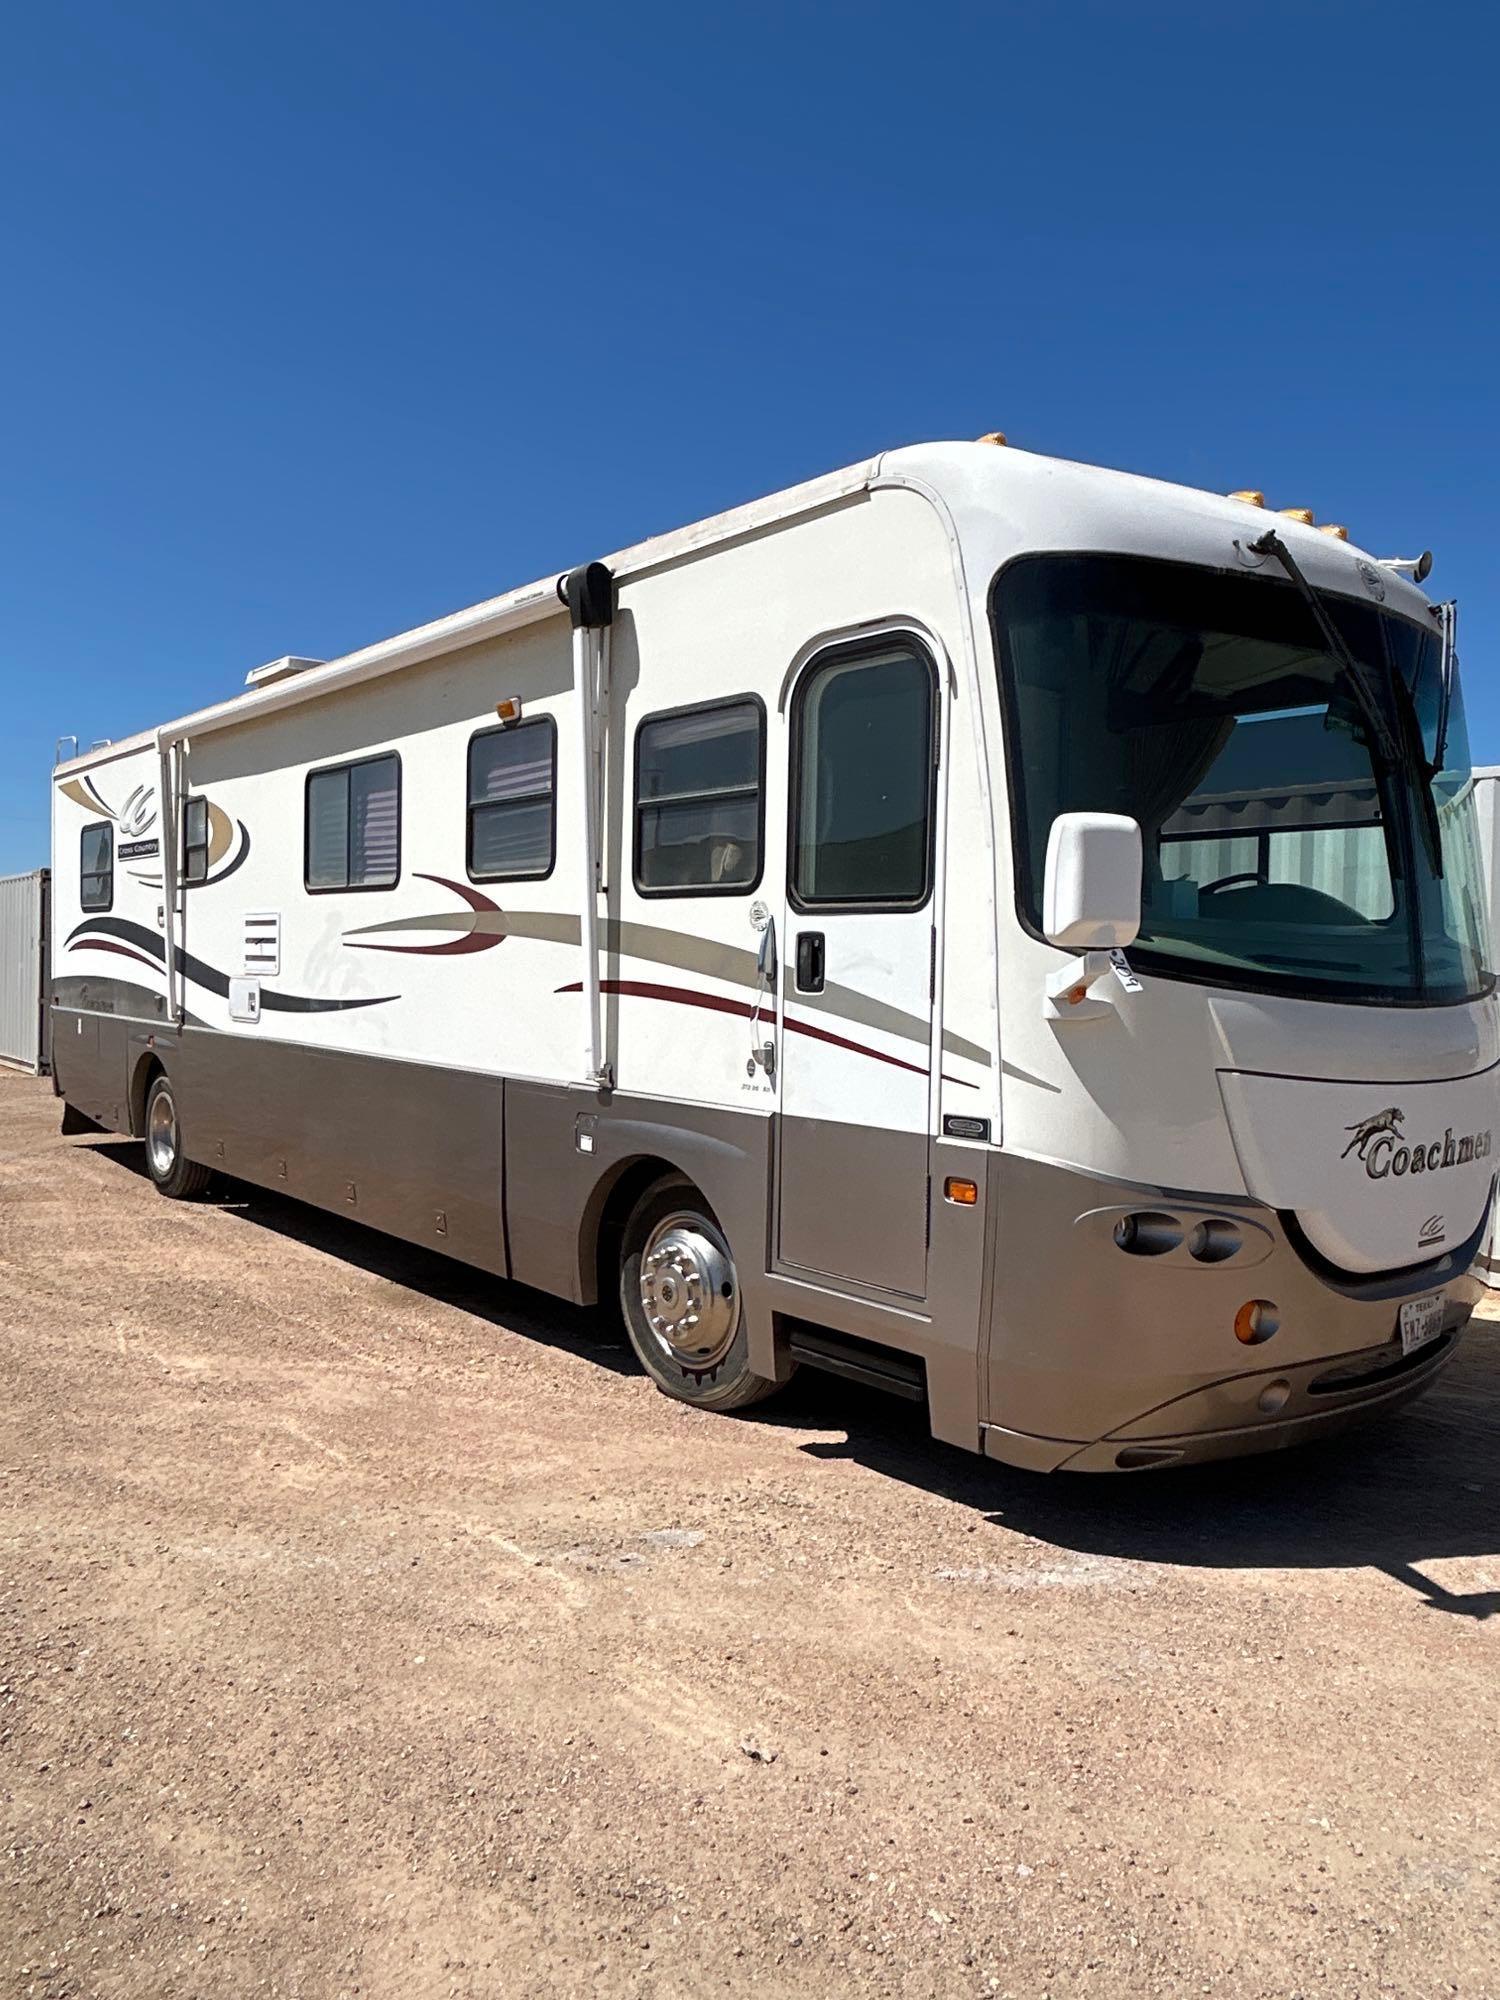 2003 Coachmen Cross Country Motorhome with 2 Slide-Outs (1 - Elec. 1 - Hydraulic) Automatic